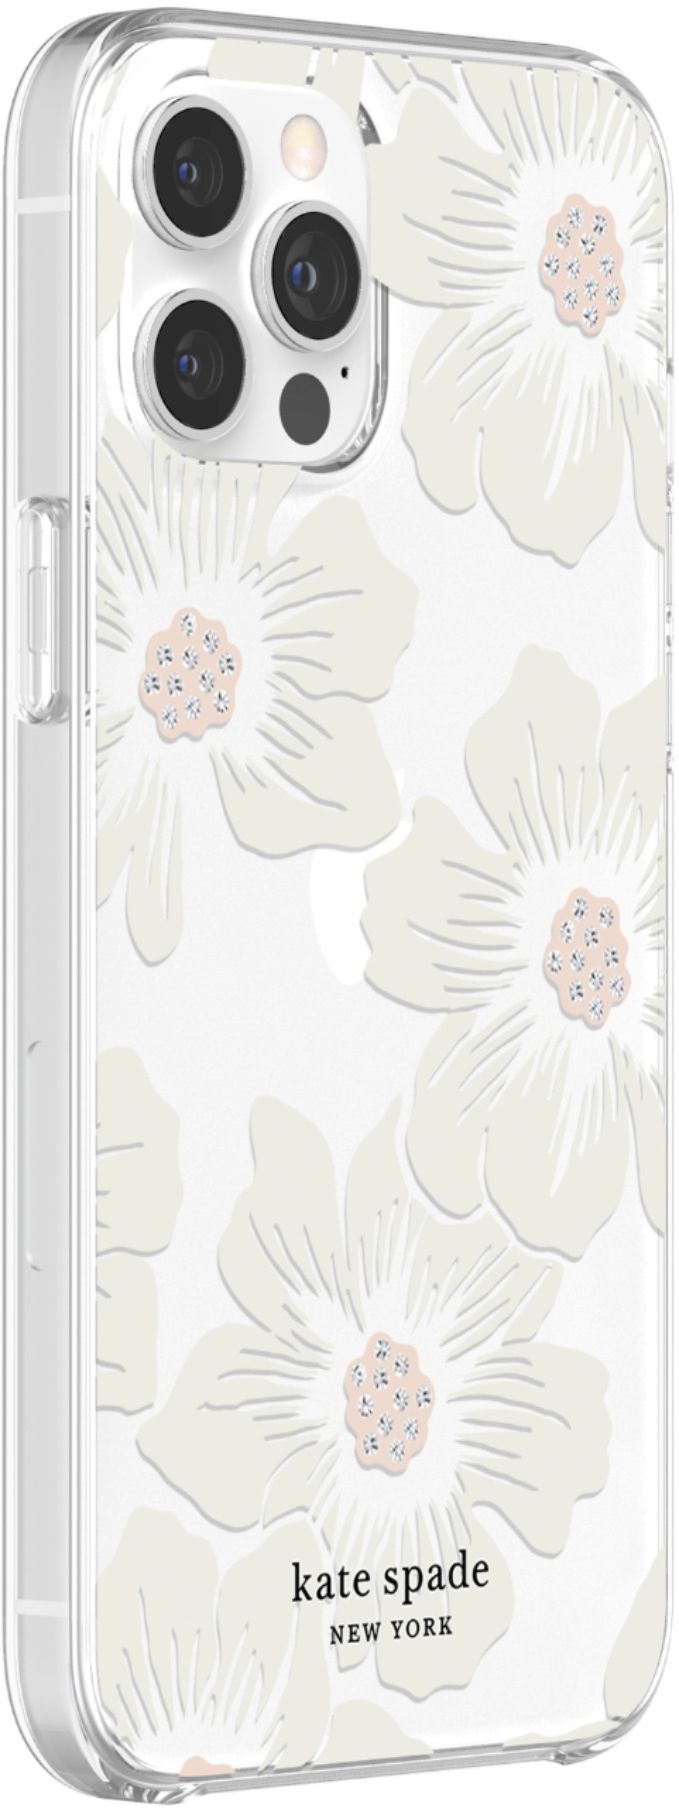 Kate Spade New York Protective Case For Iphone 12 Pro Max Ksiph 154 Hhccs Best Buy